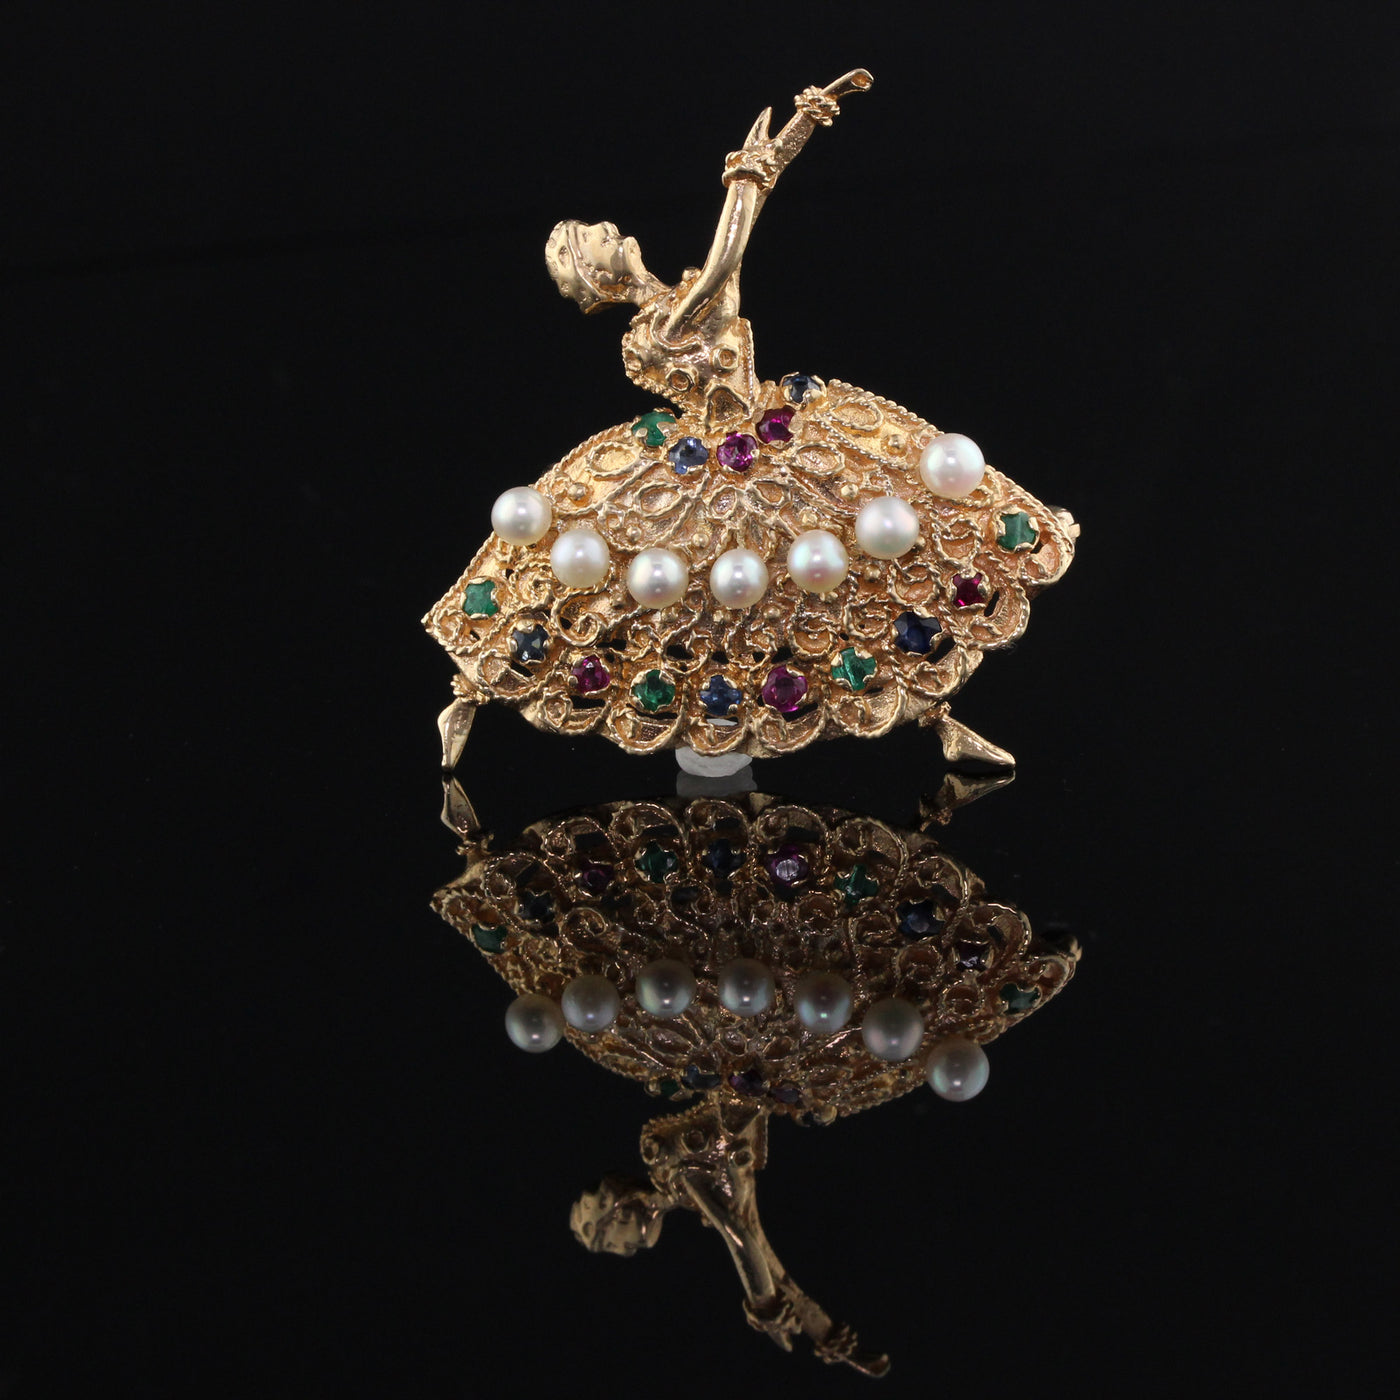 Vintage Estate 14K Yellow Gold, Pearl, Ruby, Sapphire & Emerald Ballerina Dancer Pin Brooch - The Antique Parlour